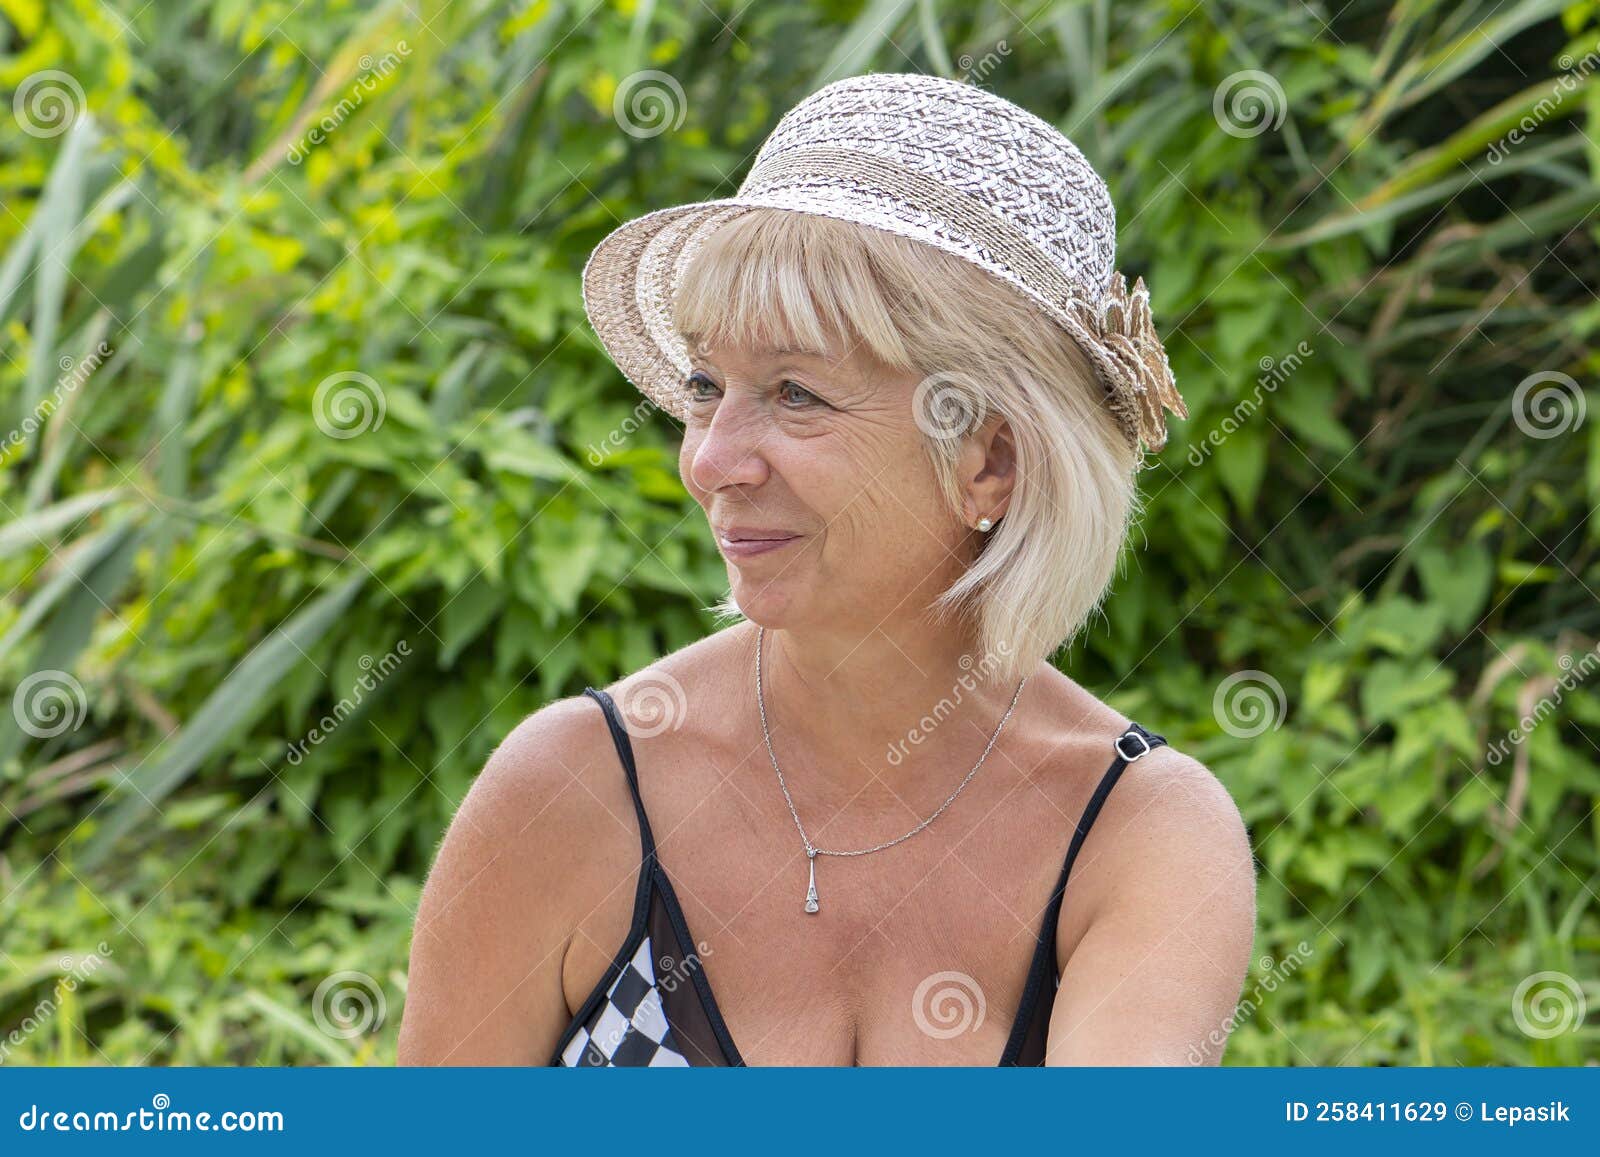 Portrait Of A Elderly Woman 60 65 Years Old In A Straw Hat And Swimsuit